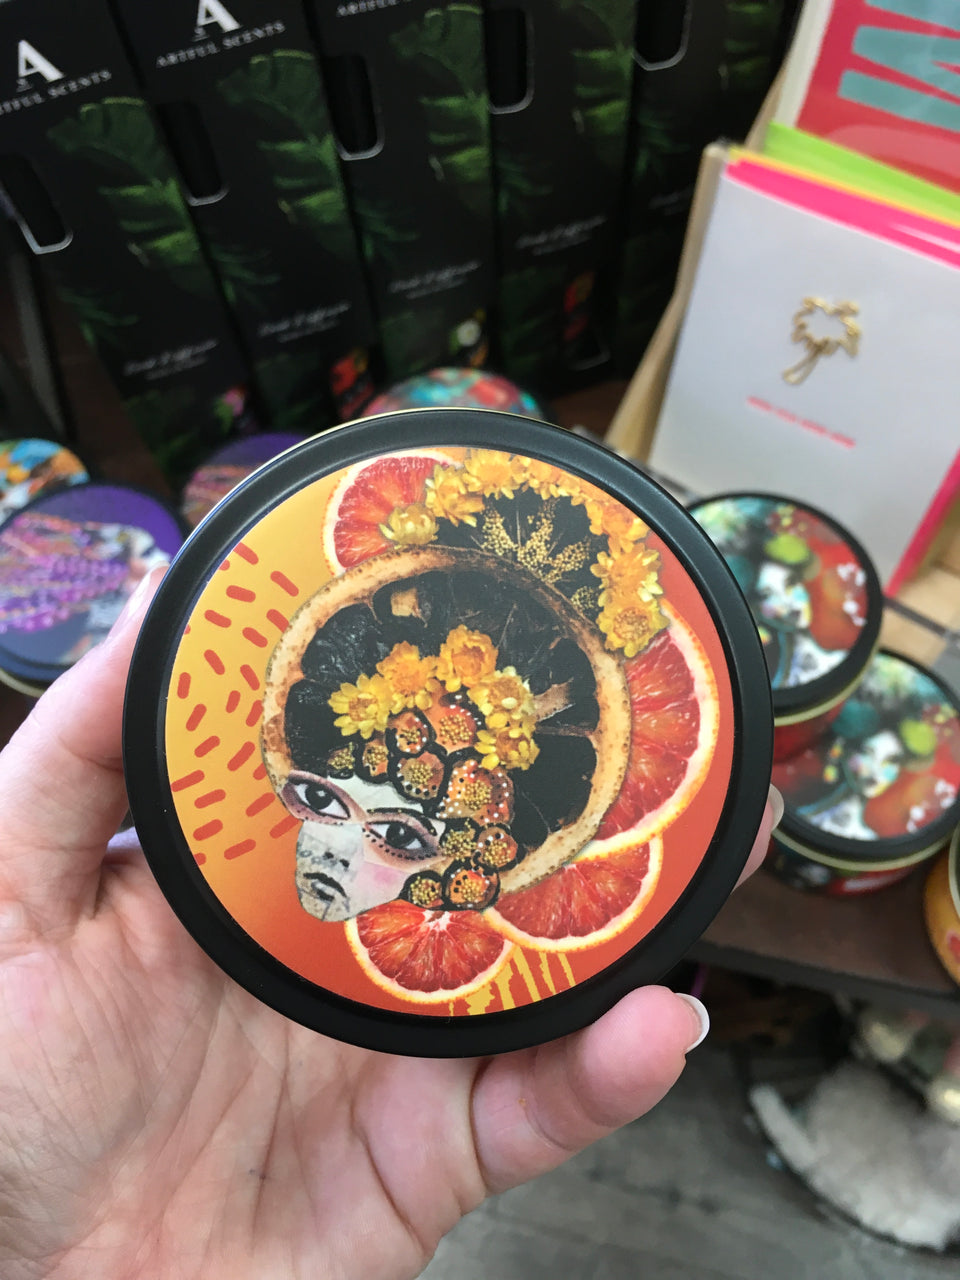 Top of round candle tin. Bold oranges and a dramatic face with big eyes and hair made of flowers.